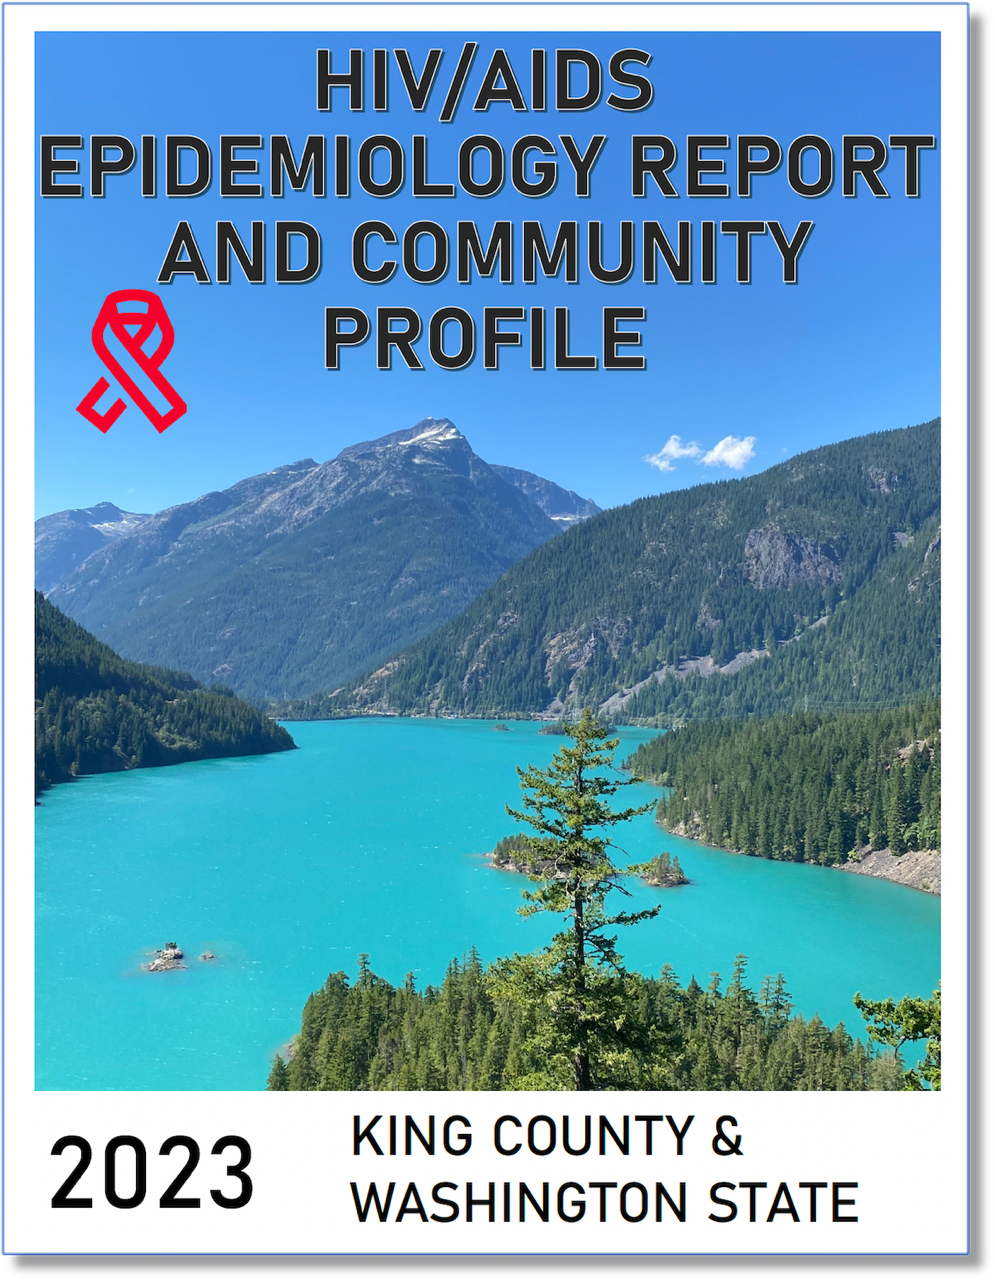 Screenshot of the cover for the 2023 HIV/AIDS Epidemiology Report and Community Profile